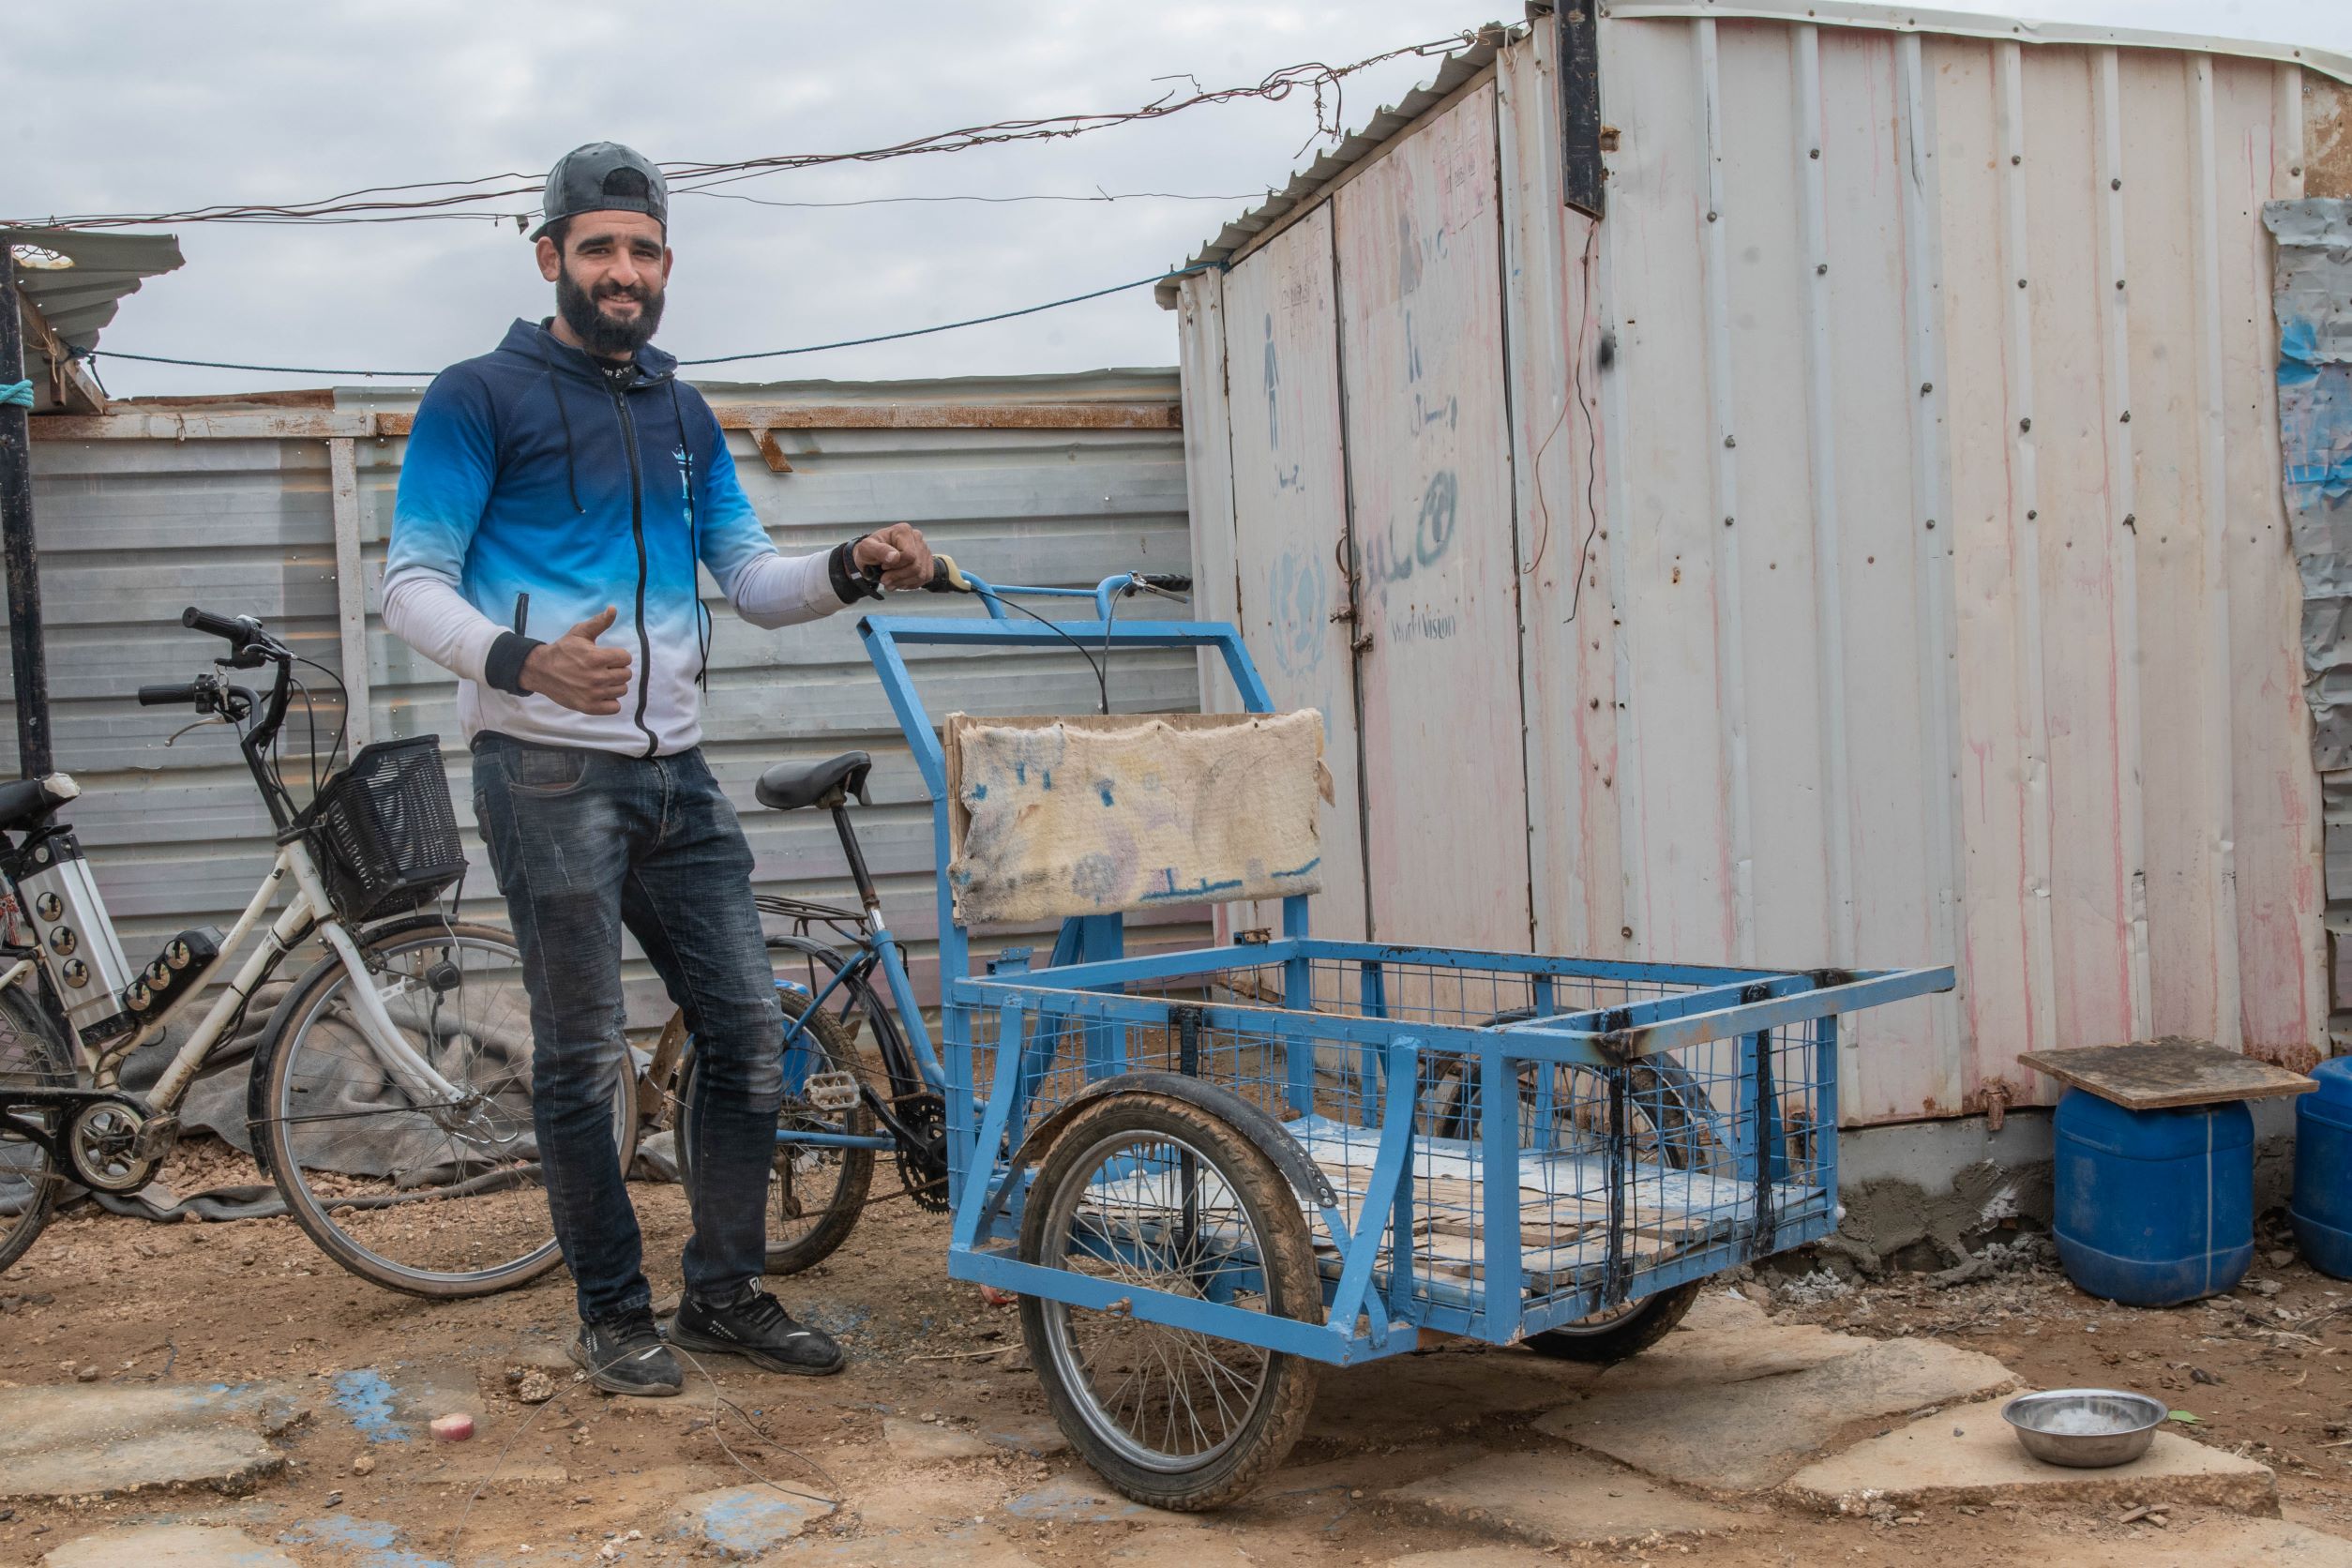 Aqil built this cart to help his neighbours carry gallons of water. Some places, like the community centres, have running water, but most people have to transport gallons of water from a well to their shelters. Aqil is deaf and communicates mostly with hand gestures. Some neighbours learned sign language to communicate with him.